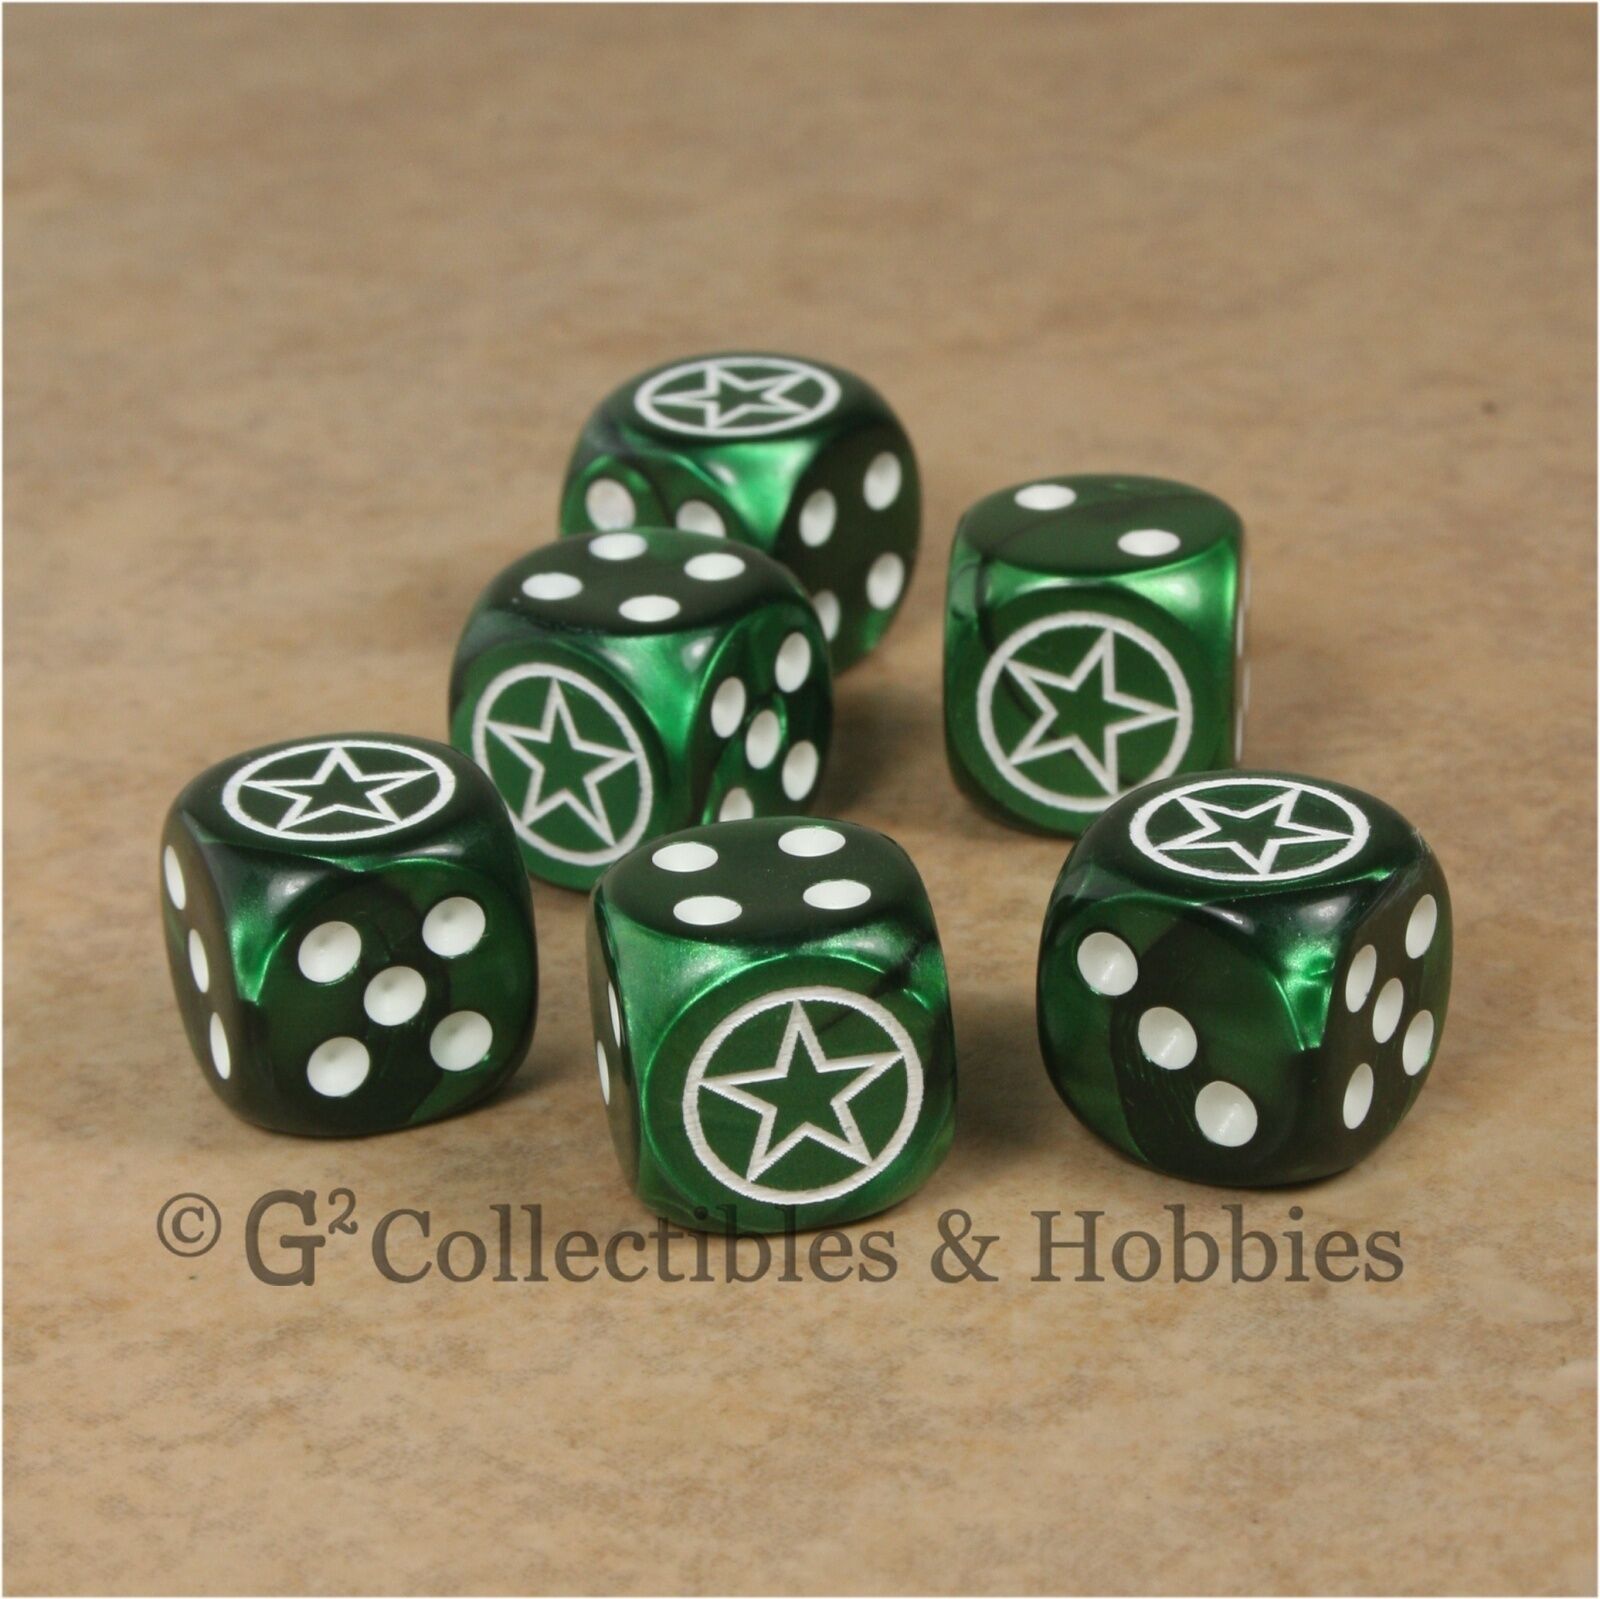 New 6 Us Army Invasion Star Dice Set 16mm Rpg War Game D6 Wwii American Military